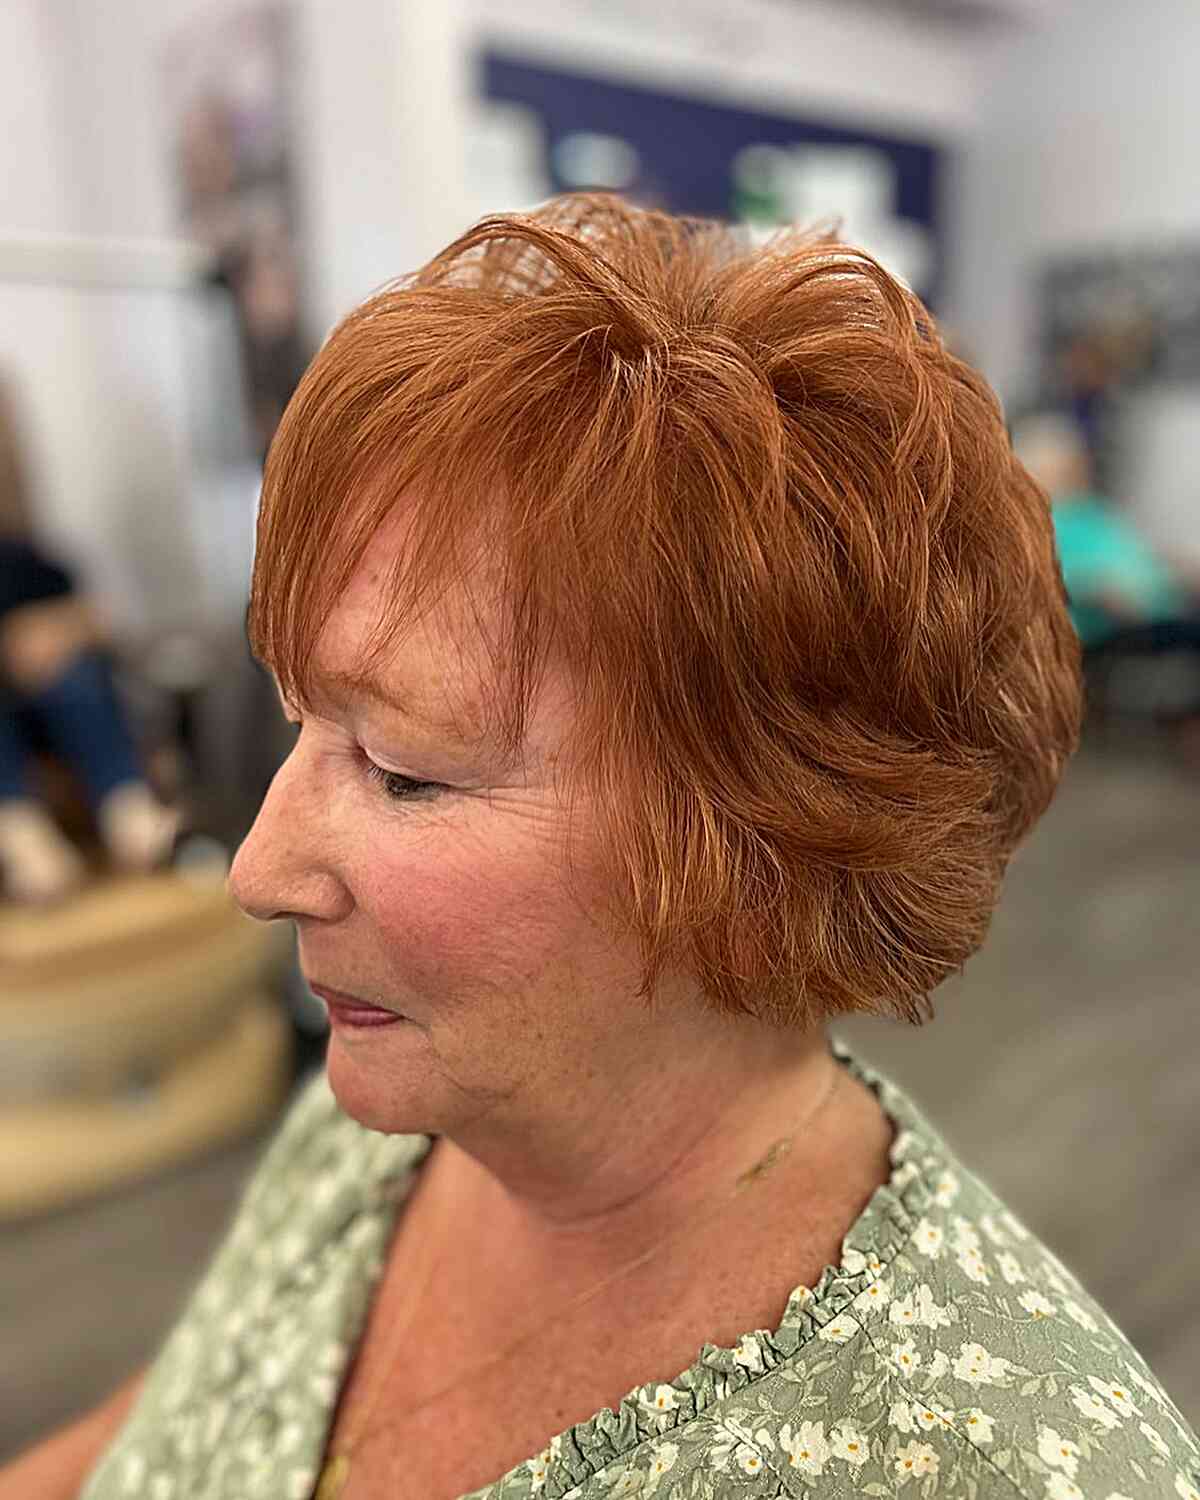 Short On Time? Try These Wash-and-Wear Haircuts for Women Over 60